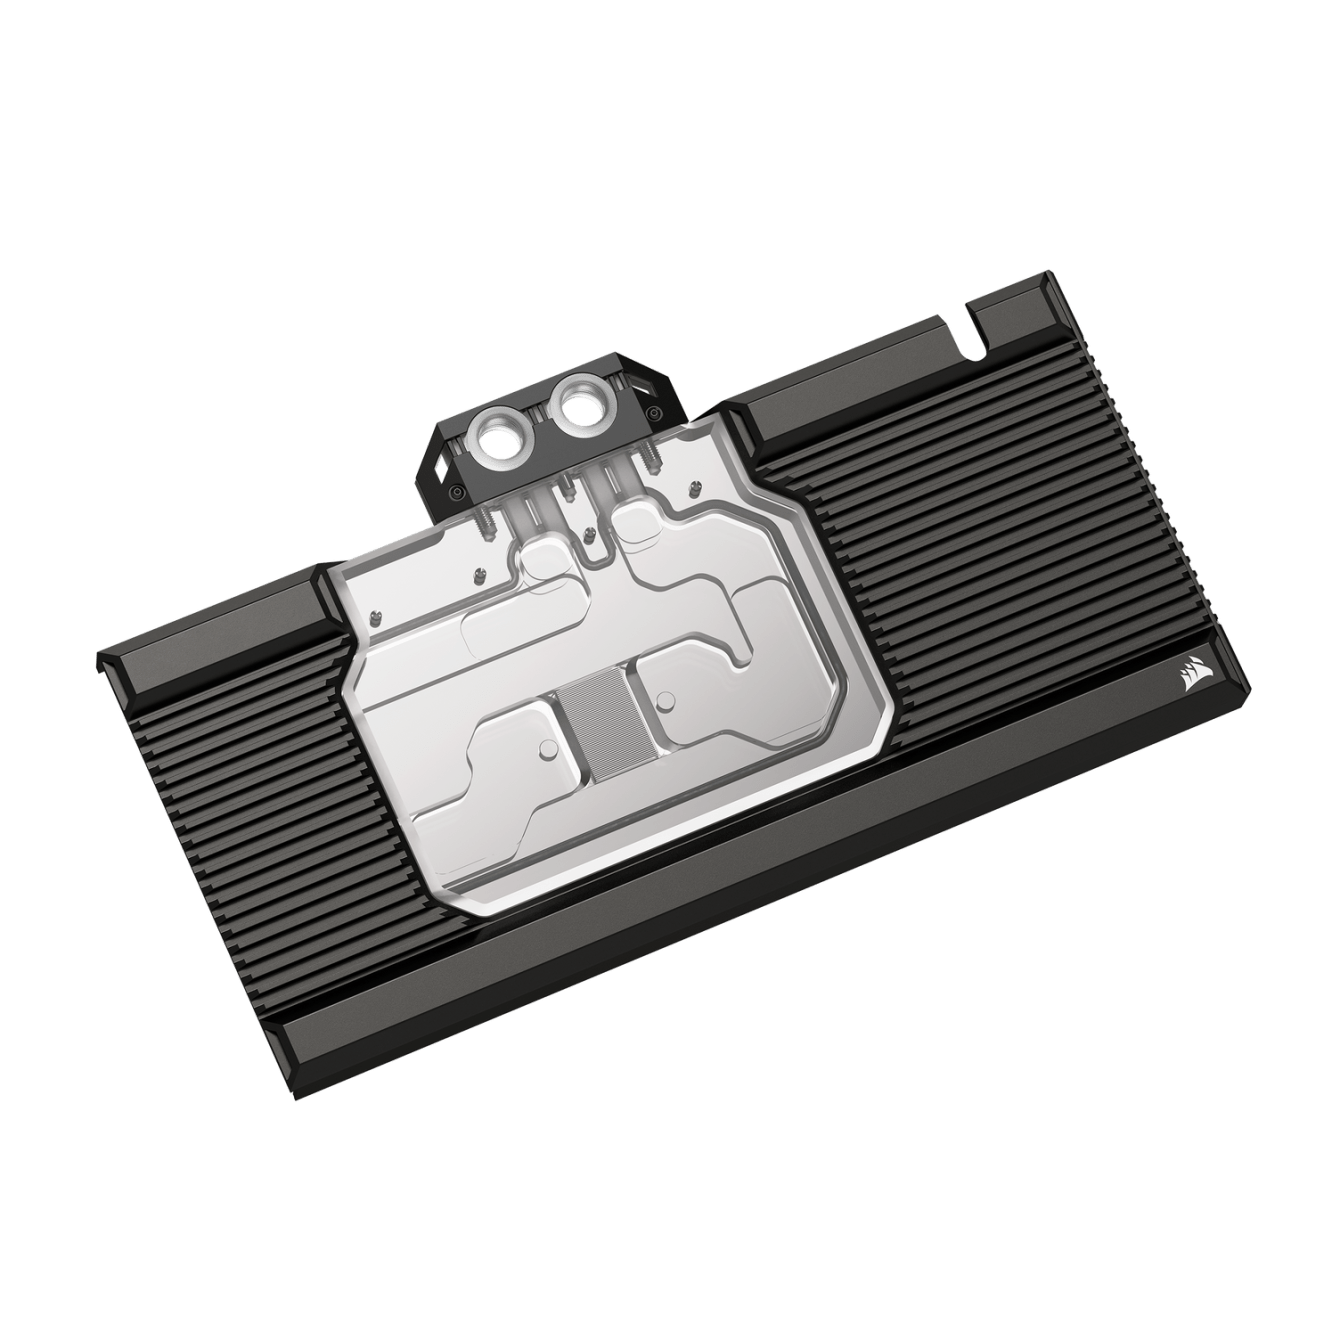 Expanding CORSAIR's Hydro X Series with iCUE LINK components